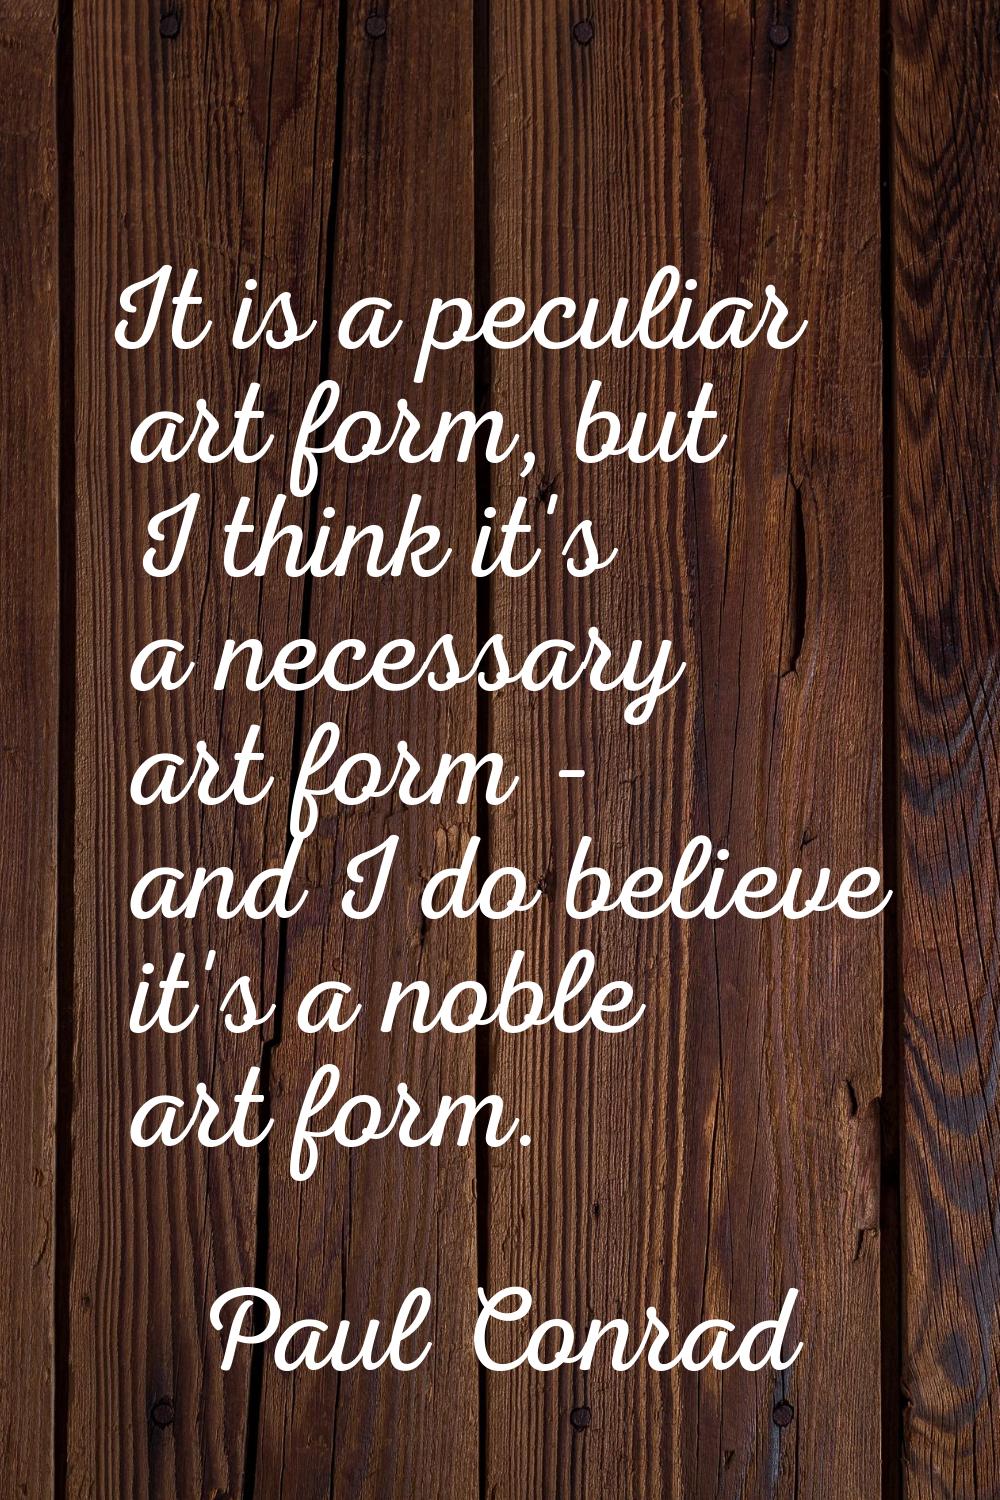 It is a peculiar art form, but I think it's a necessary art form - and I do believe it's a noble ar